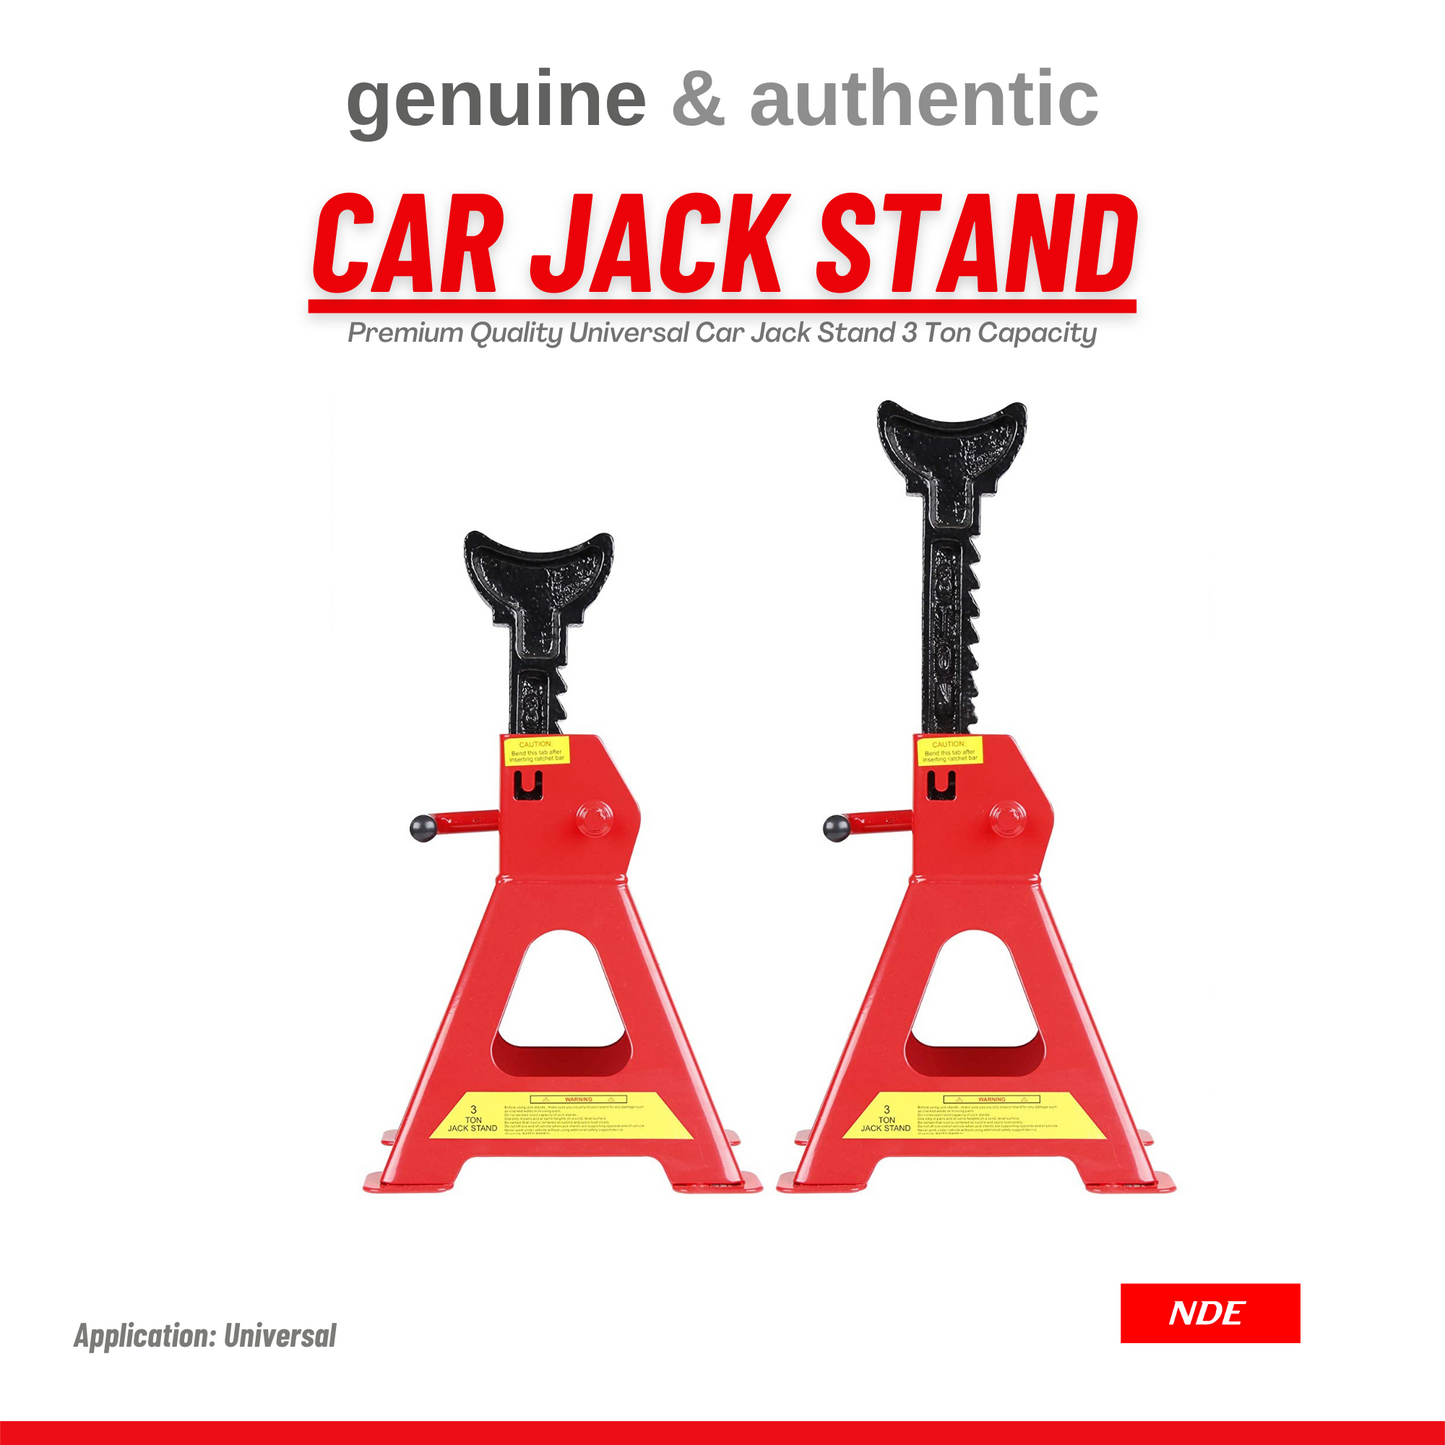 JACK STAND FOR UNIVERSAL APPLICATION